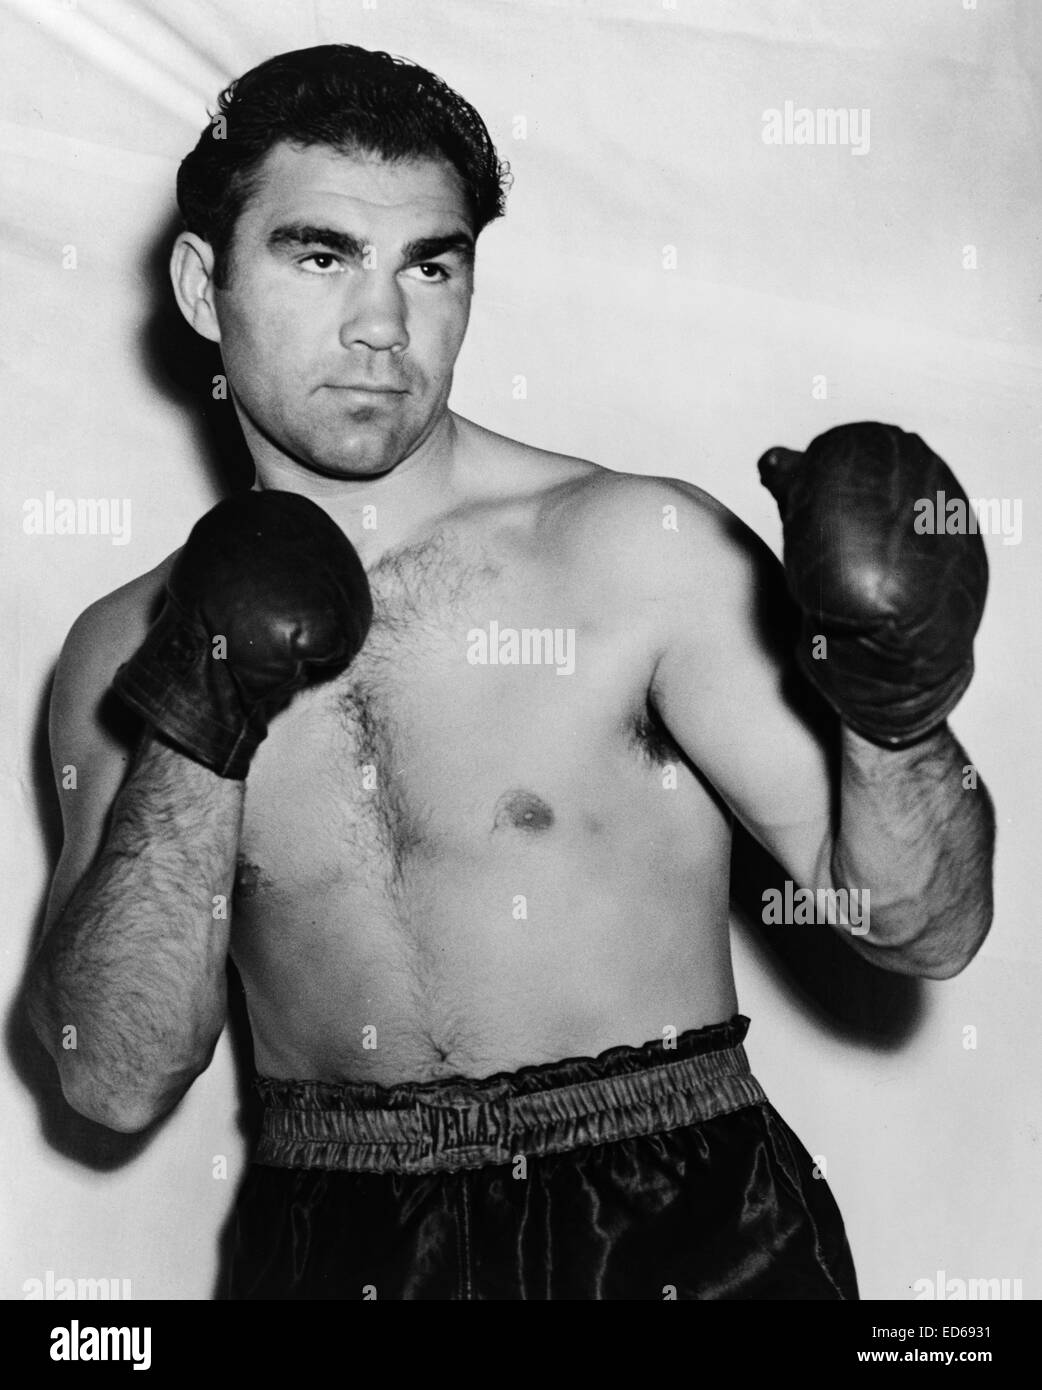 Max Schmeling wearing boxing trunks and gloves, 1938 Stock Photo